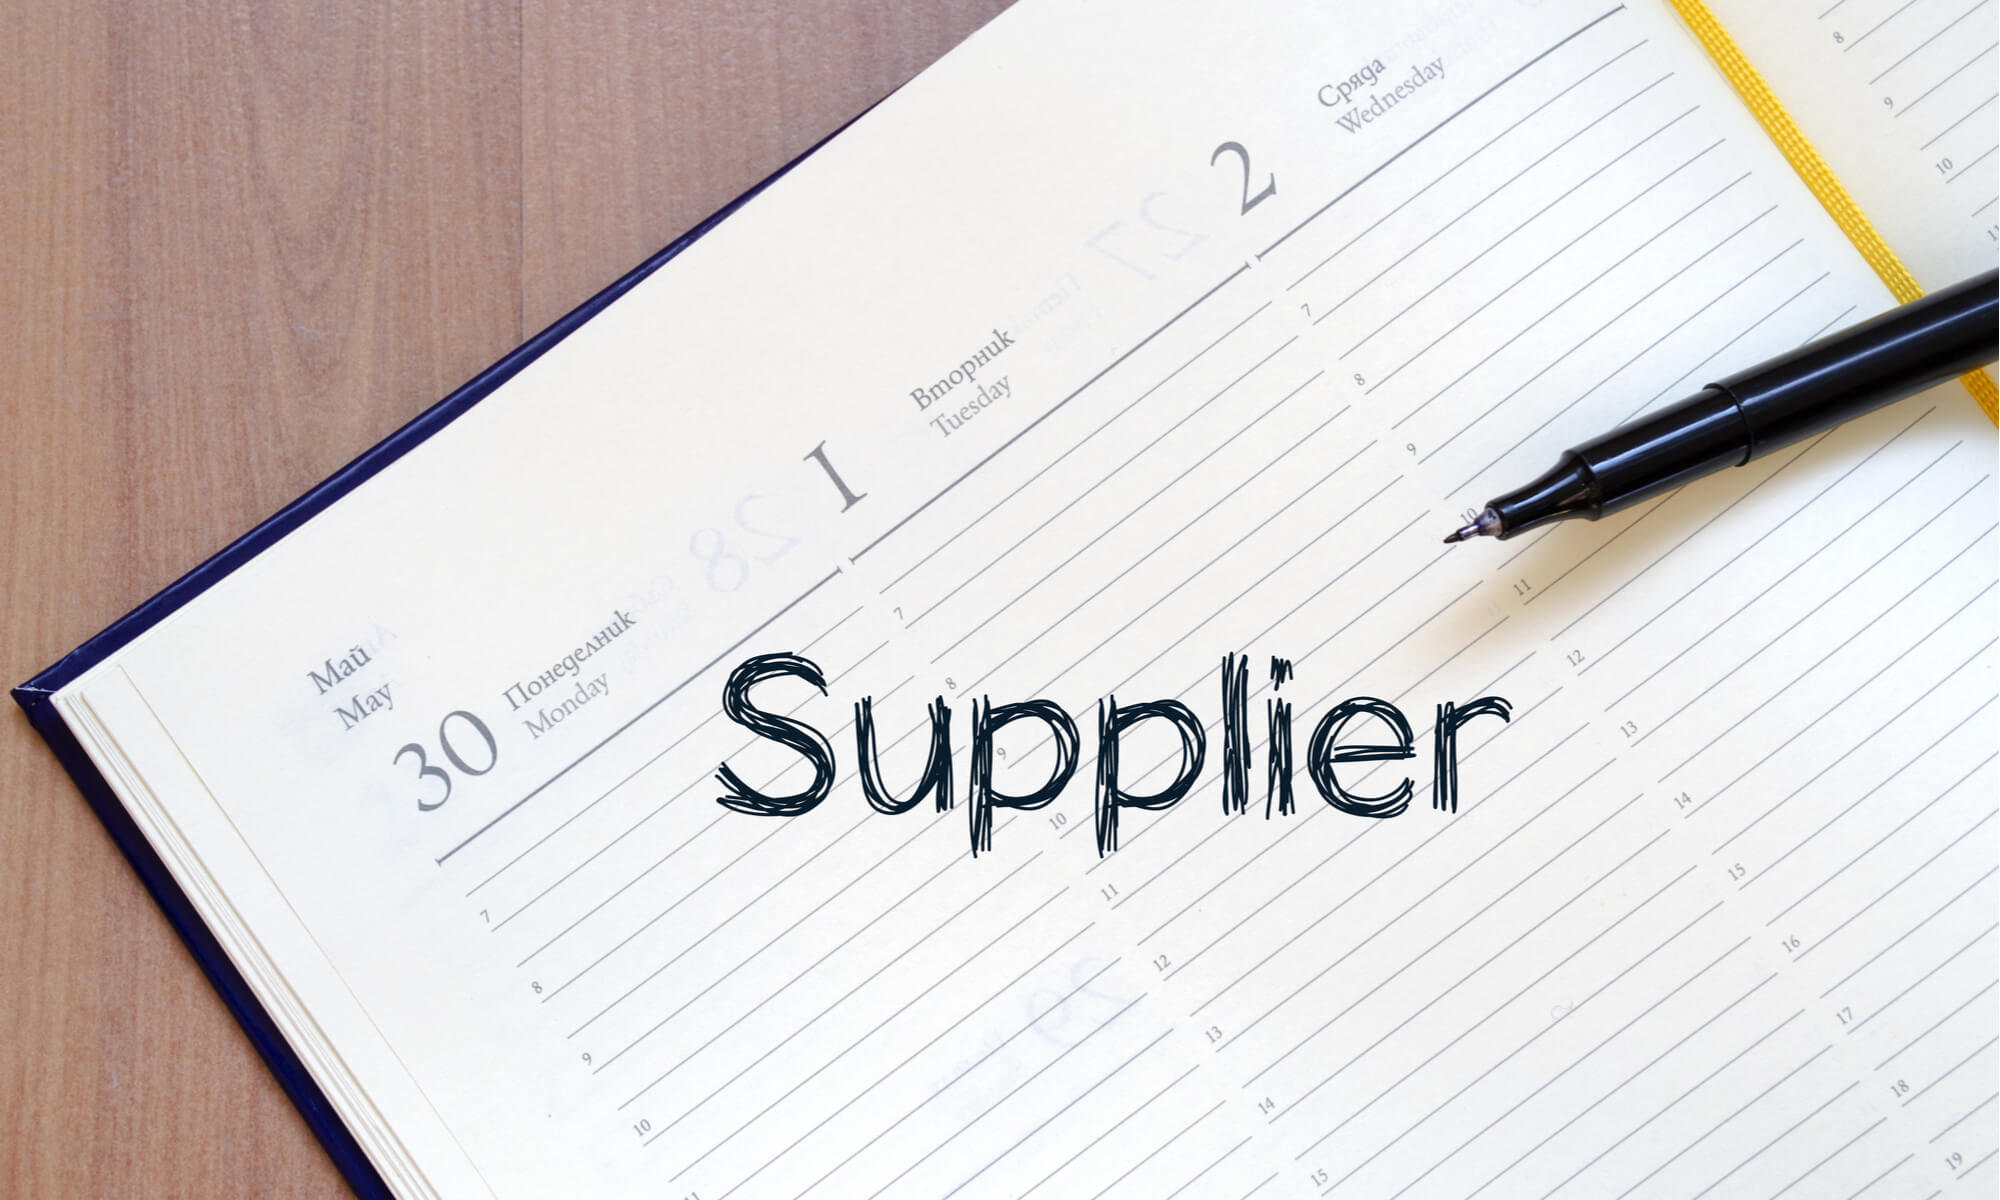 Tech tutorial: How to find a supplier